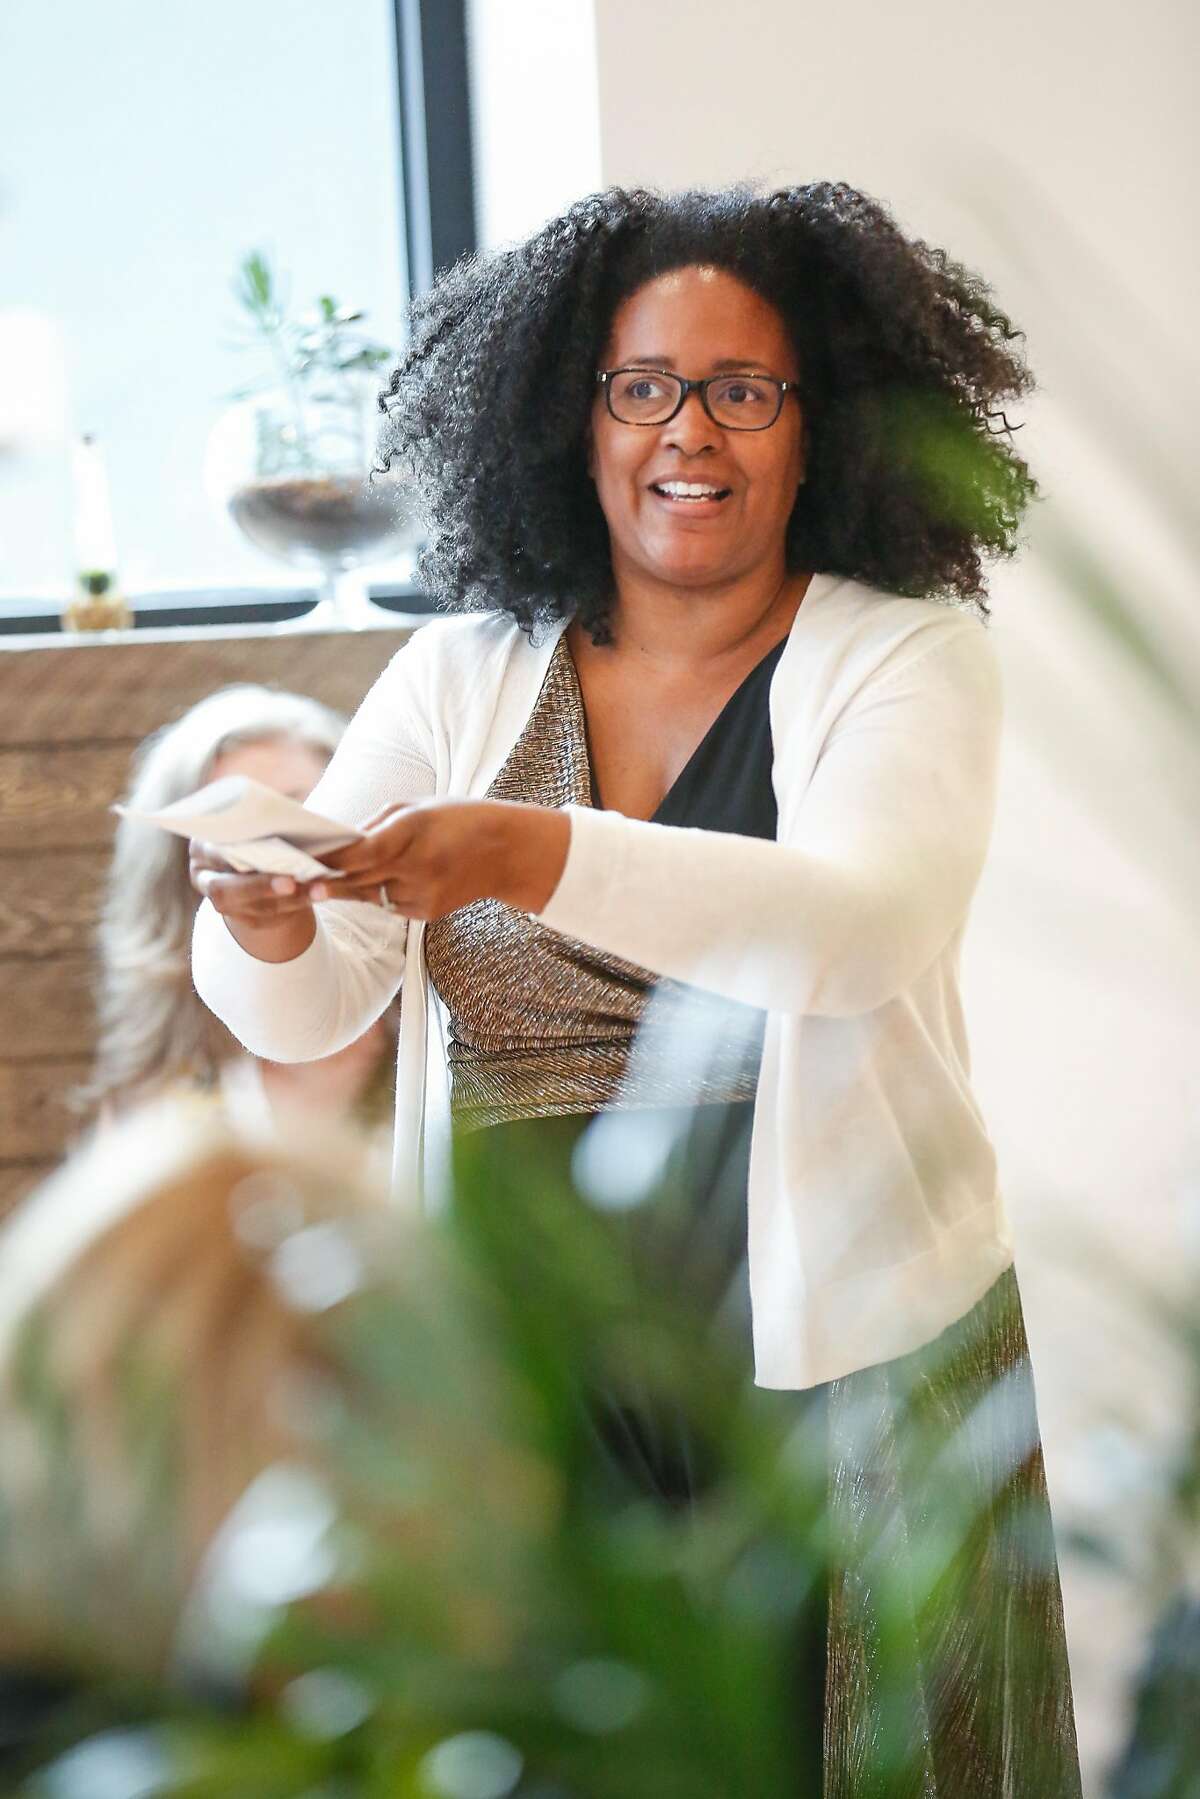 Ren� Jones, cofounder of Triple Apex, talks about her product to a group of women on Wednesday, July 25, 2018 in San Francisco, California. Ellementa organizes gatherings for women to share stories and experiences with cannabis and CBD and learn from experts in the field and discover new products.